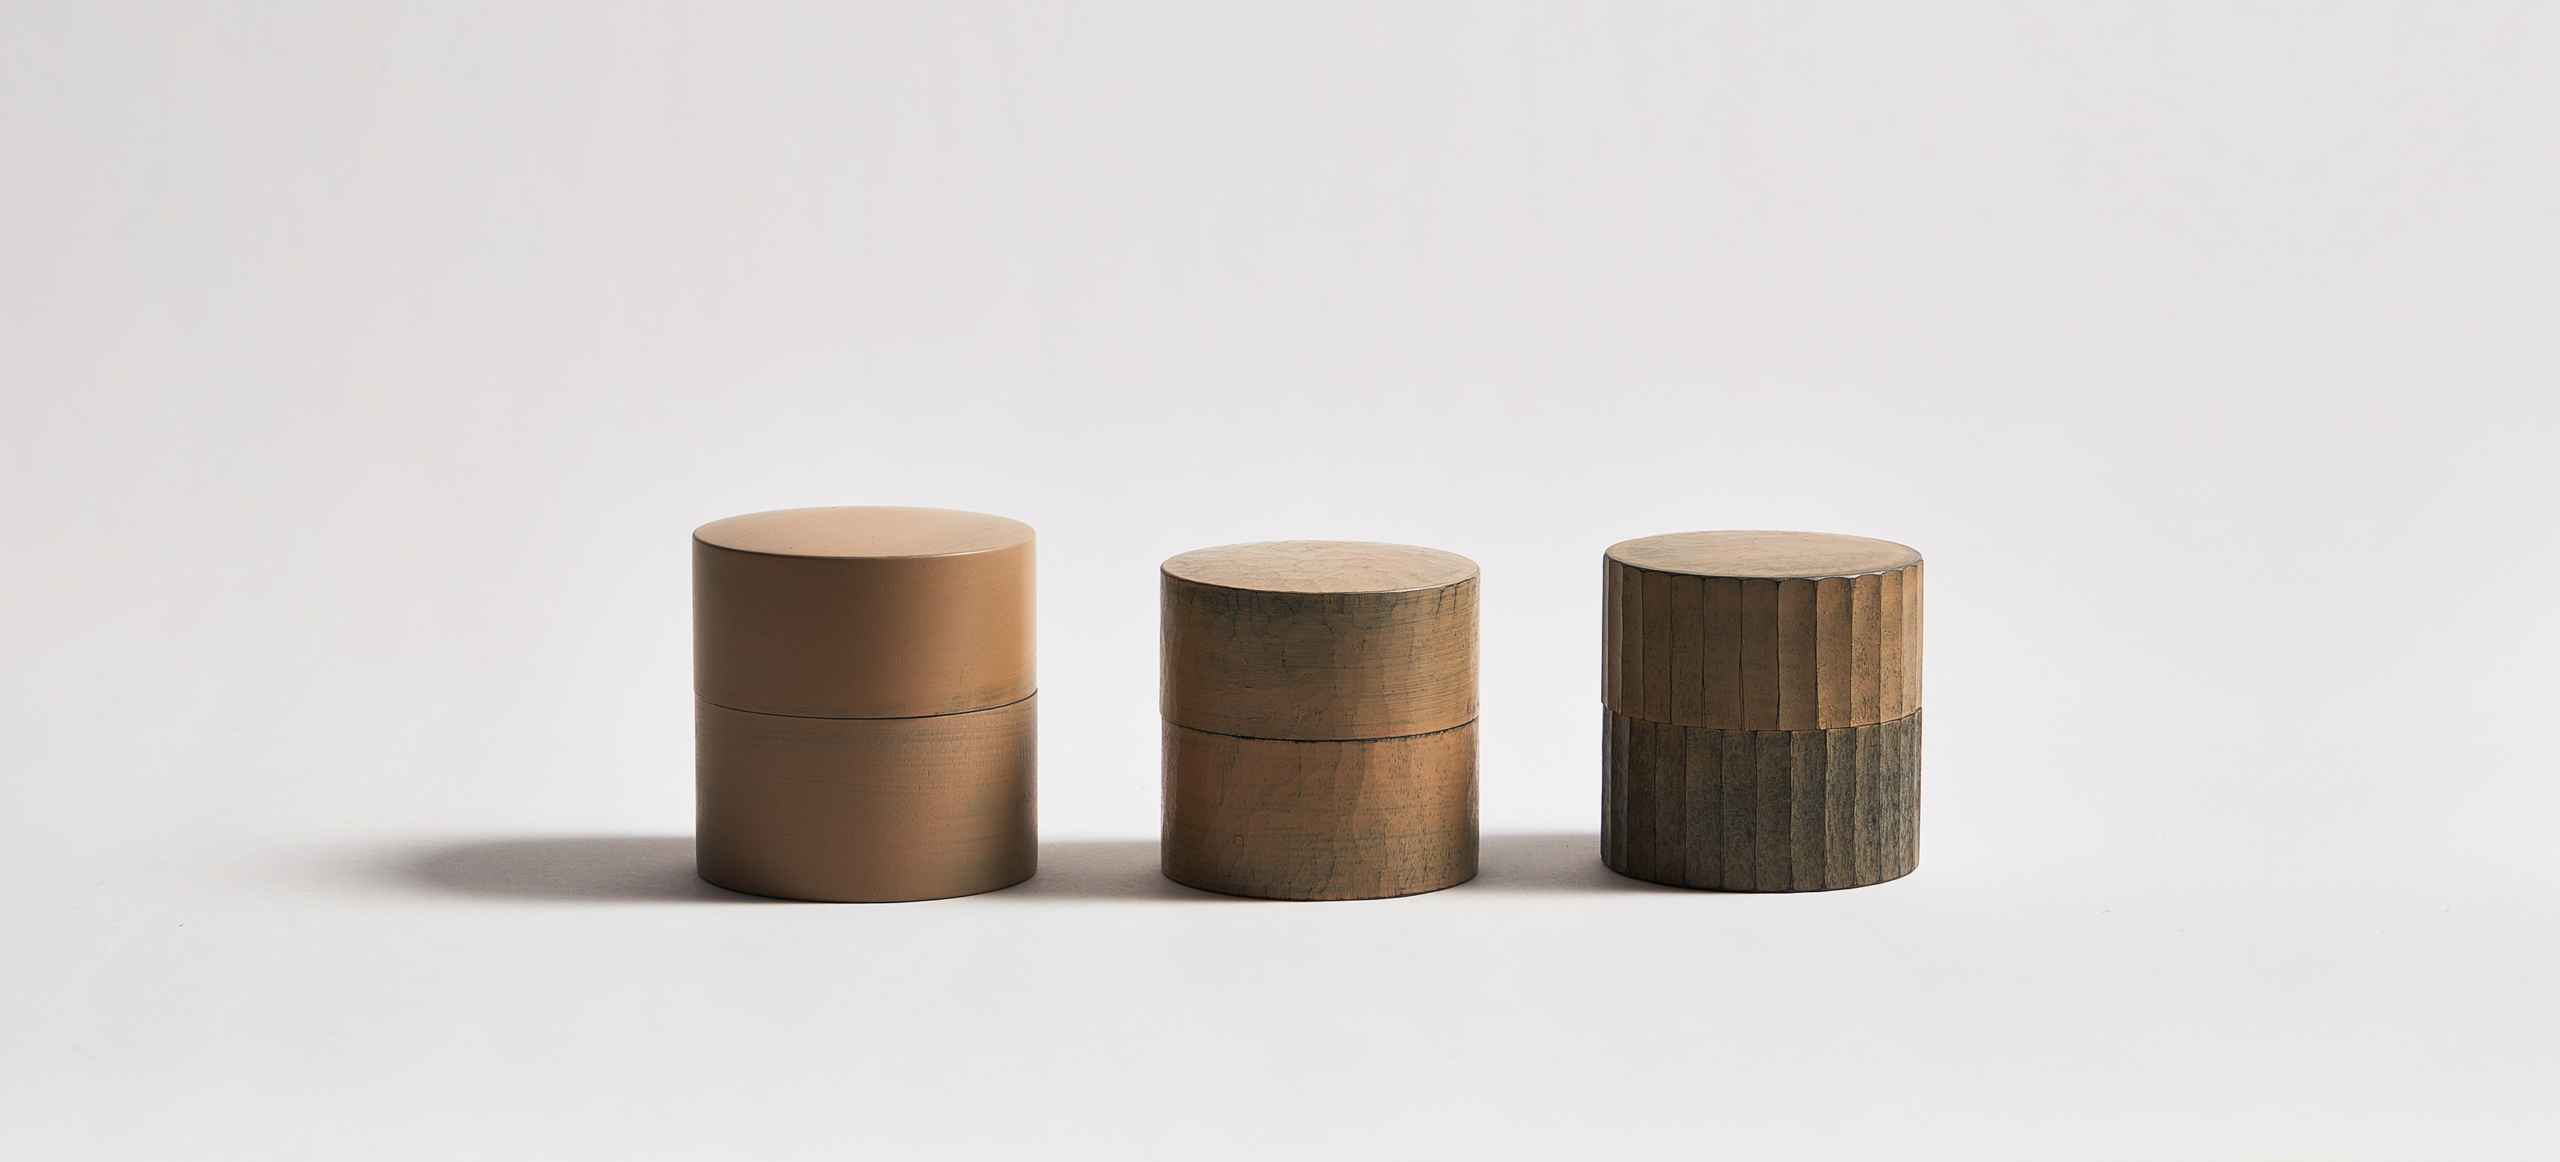 Ryuji Mitani white urushi tea canisters in a row of three against light gray background